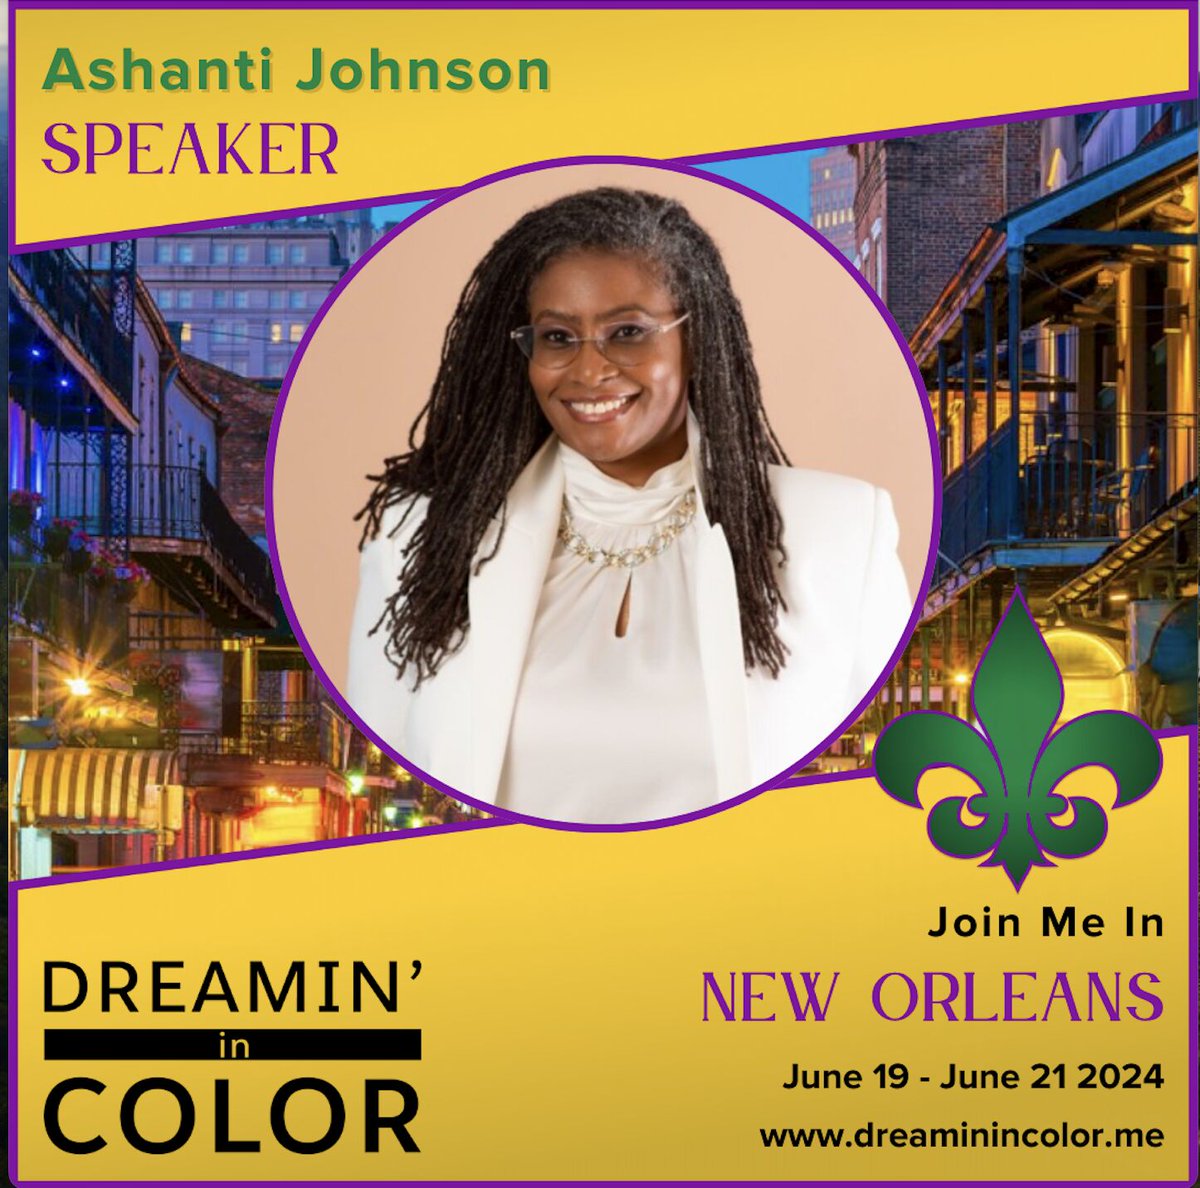 Exciting News! Join me for a transformative workshop led by Ashanti Johnson, Sr. Director at Slack, on 'Crafting the Career You Want'. Gain insights on networking, overcoming challenges, and strategizing your career path. Register now: dreaminincolor.me #BlackTechTwitter